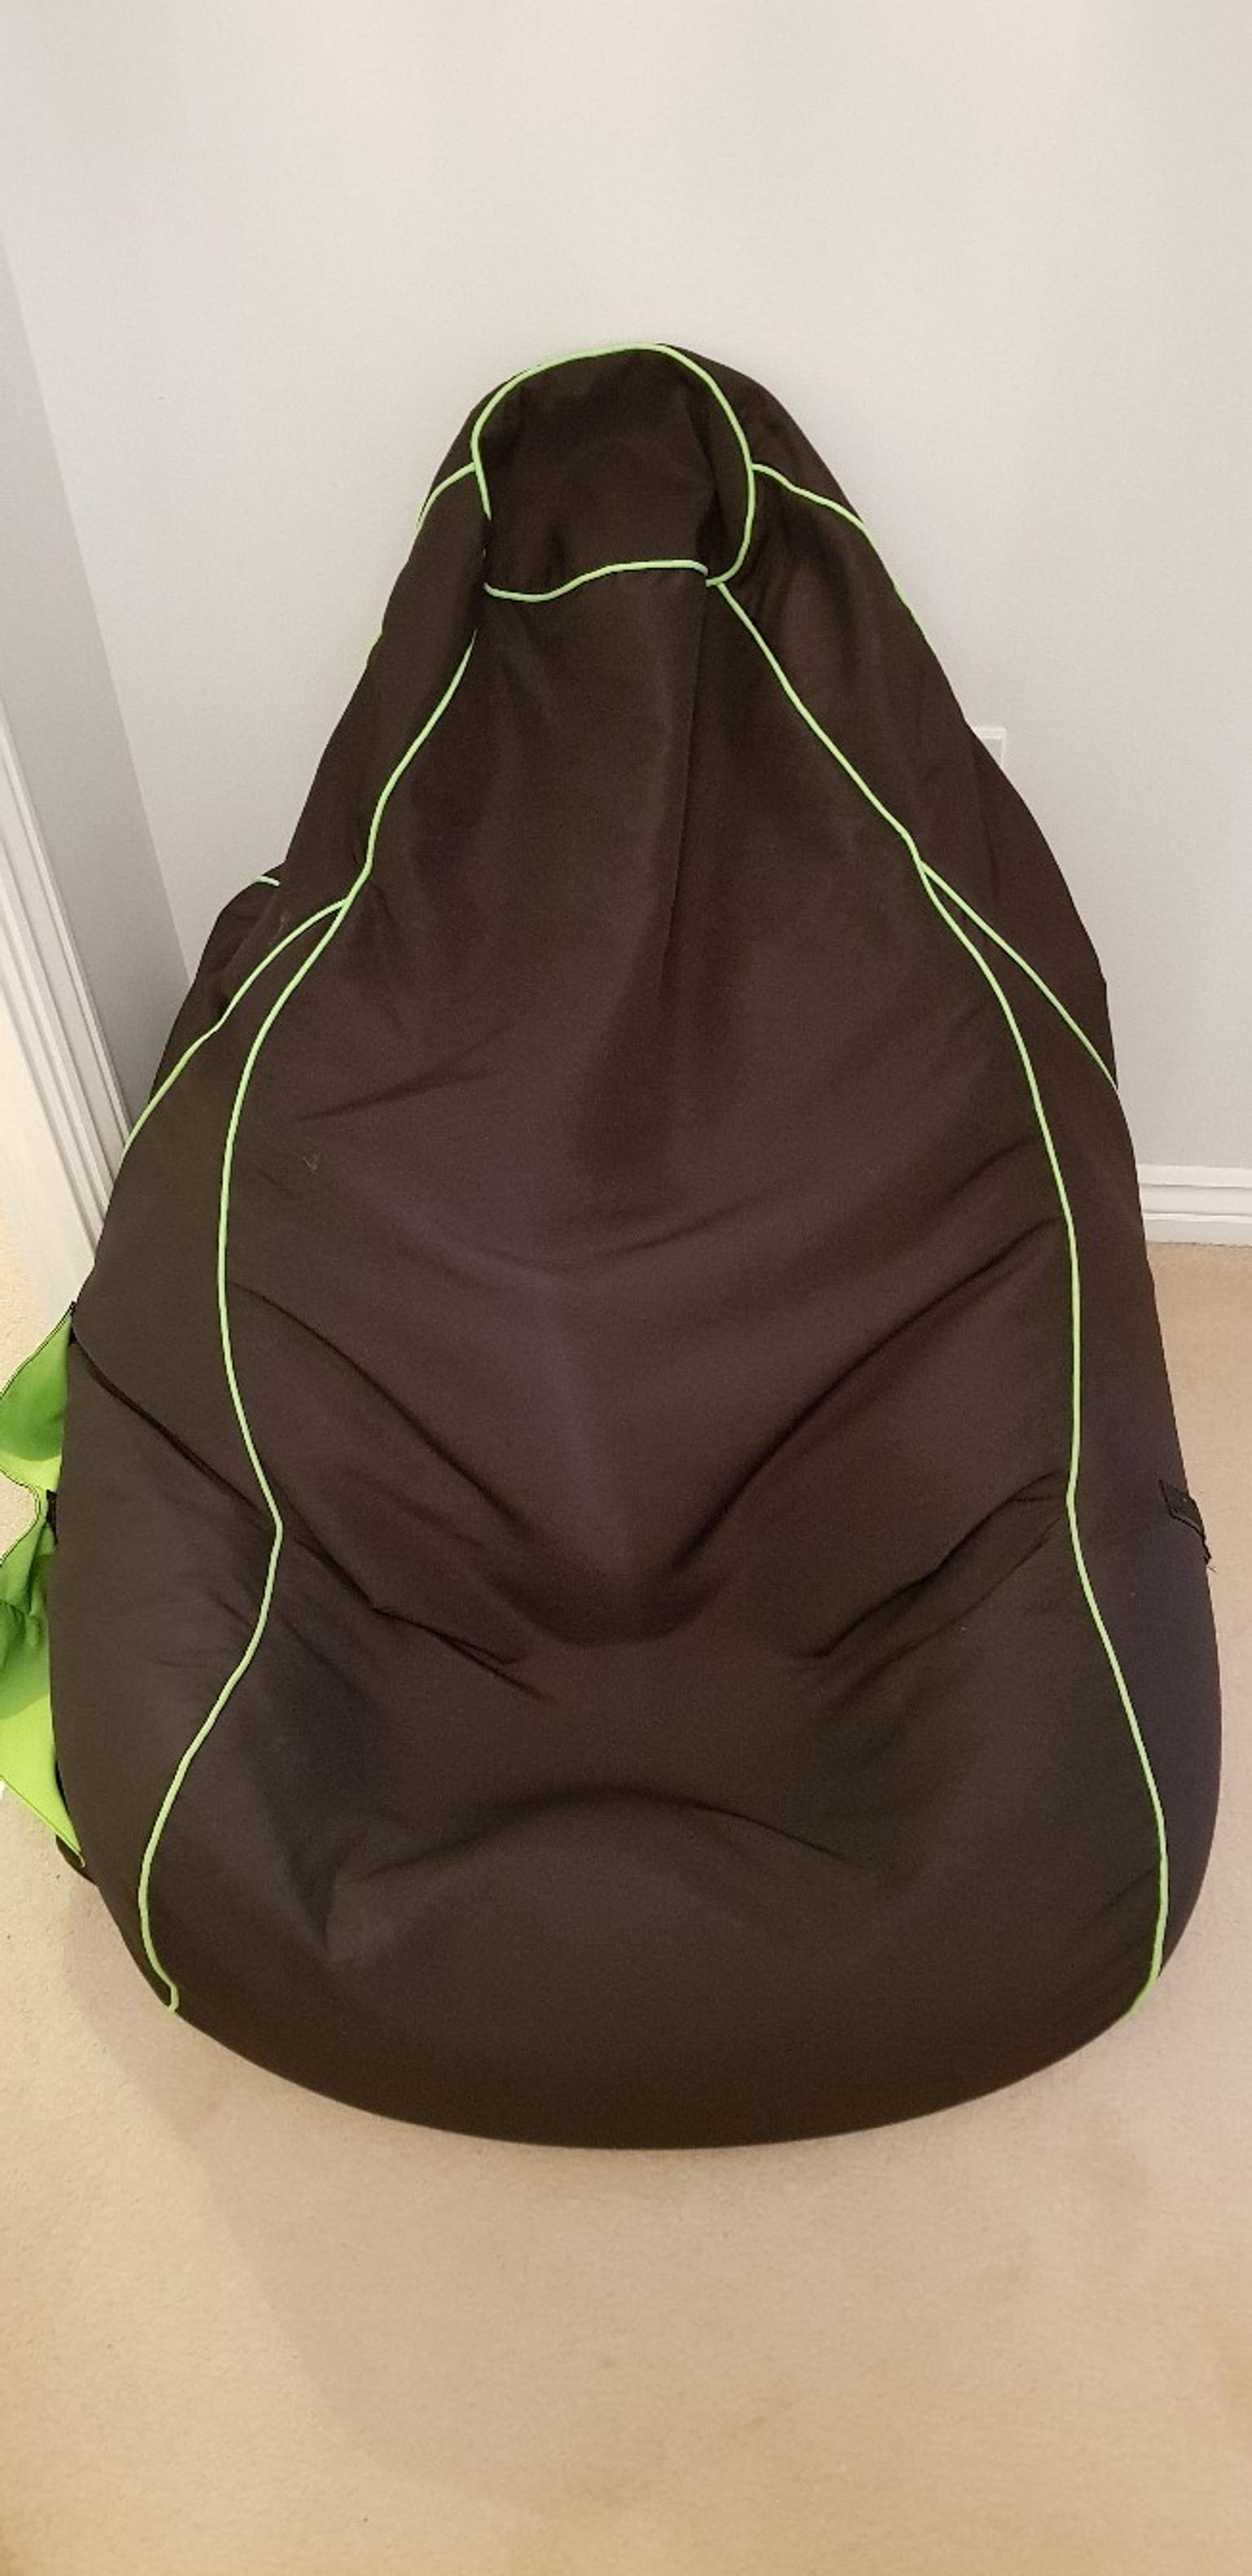 2 X Game Over Loft 25 Gaming Bean Bag Chairs In Mk10 Monkston For 60 00 For Sale Shpock